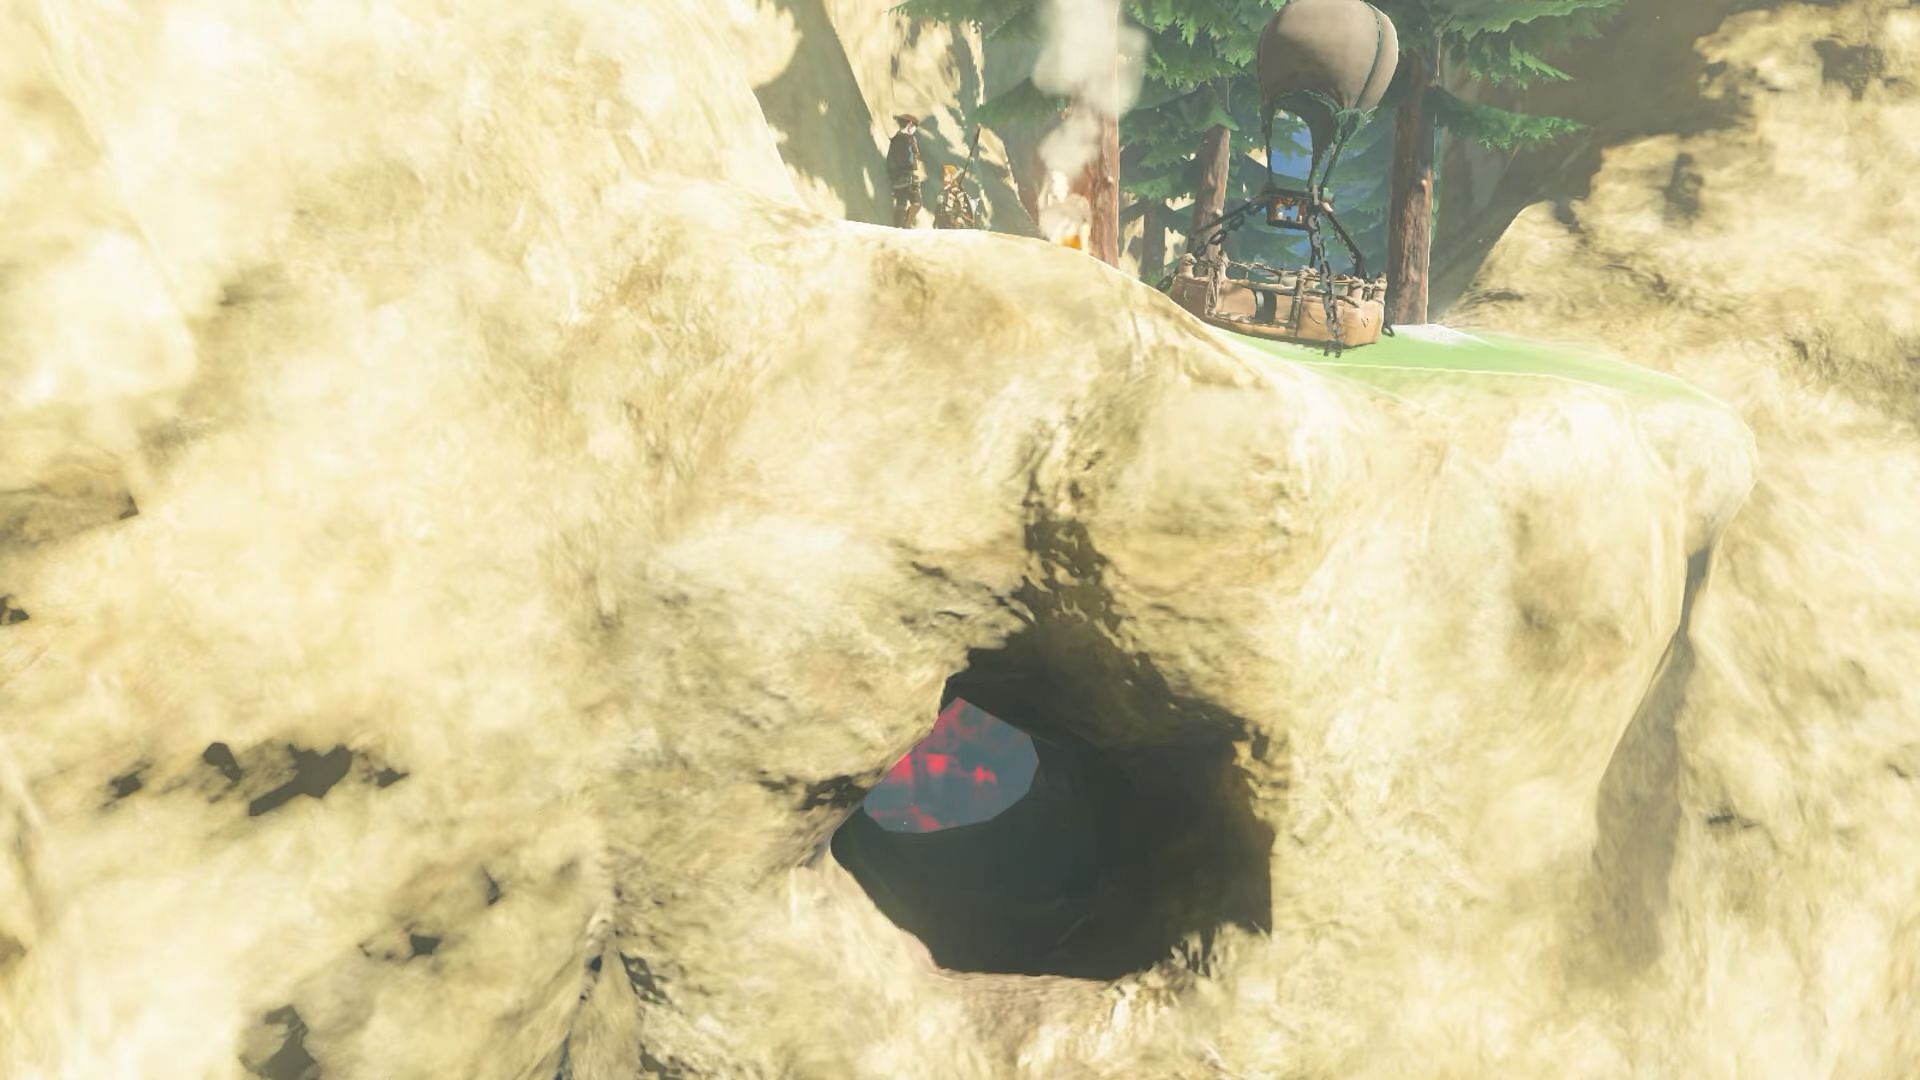 Location of the Abandoned Hebra Mine in The Tears of the Kingdom (Image via GameSpoilers YouTube)